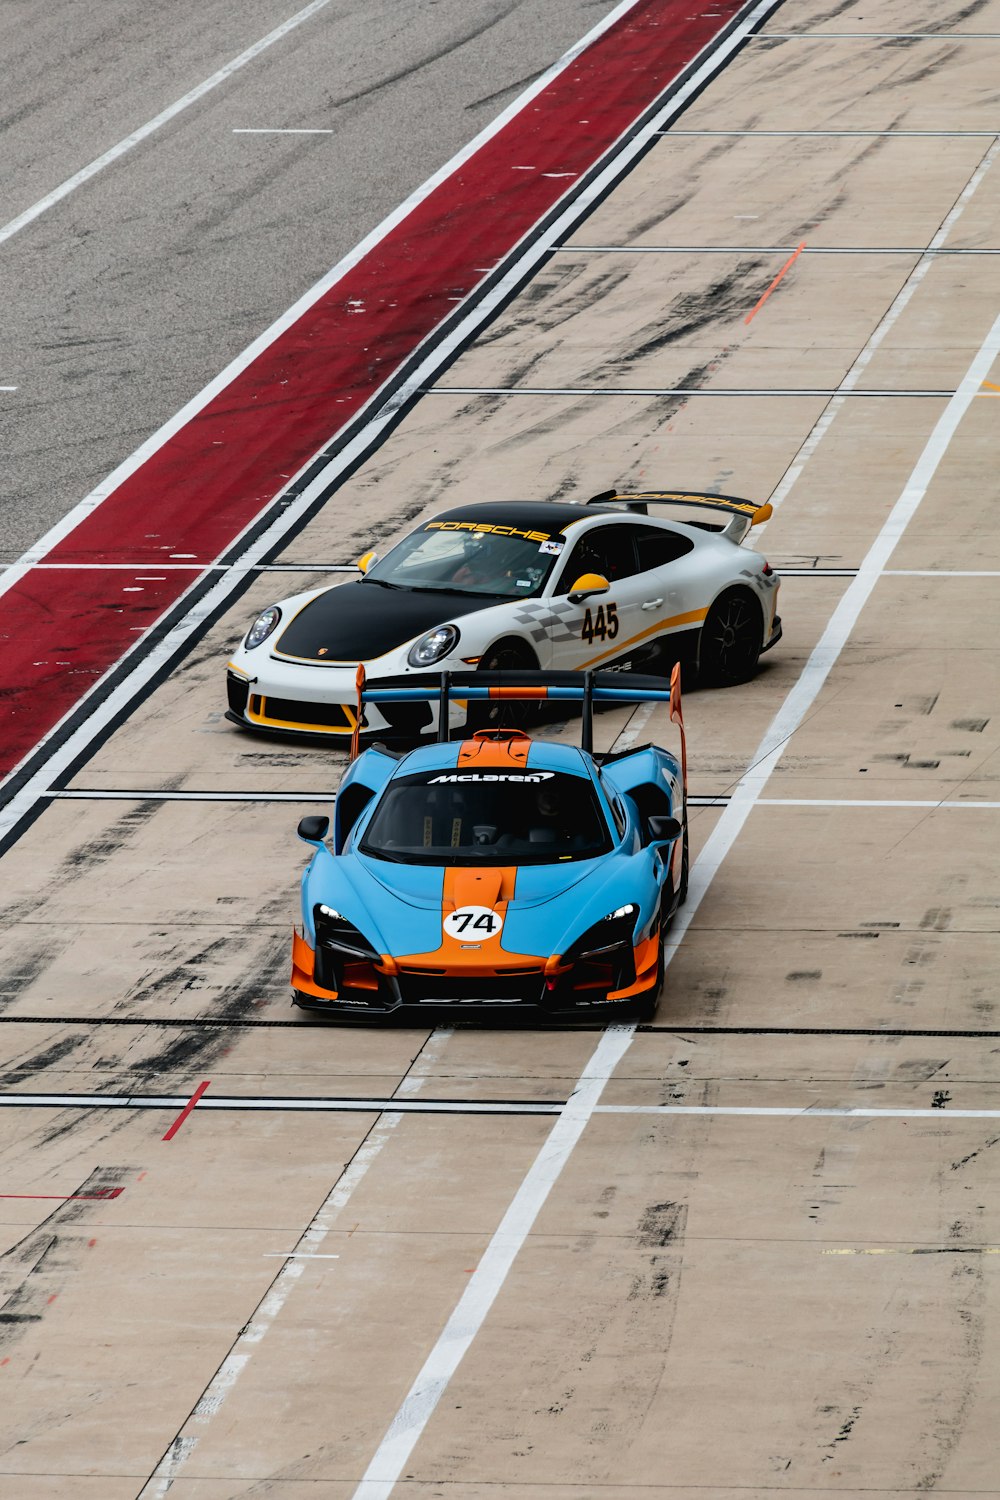 two race cars driving on a race track